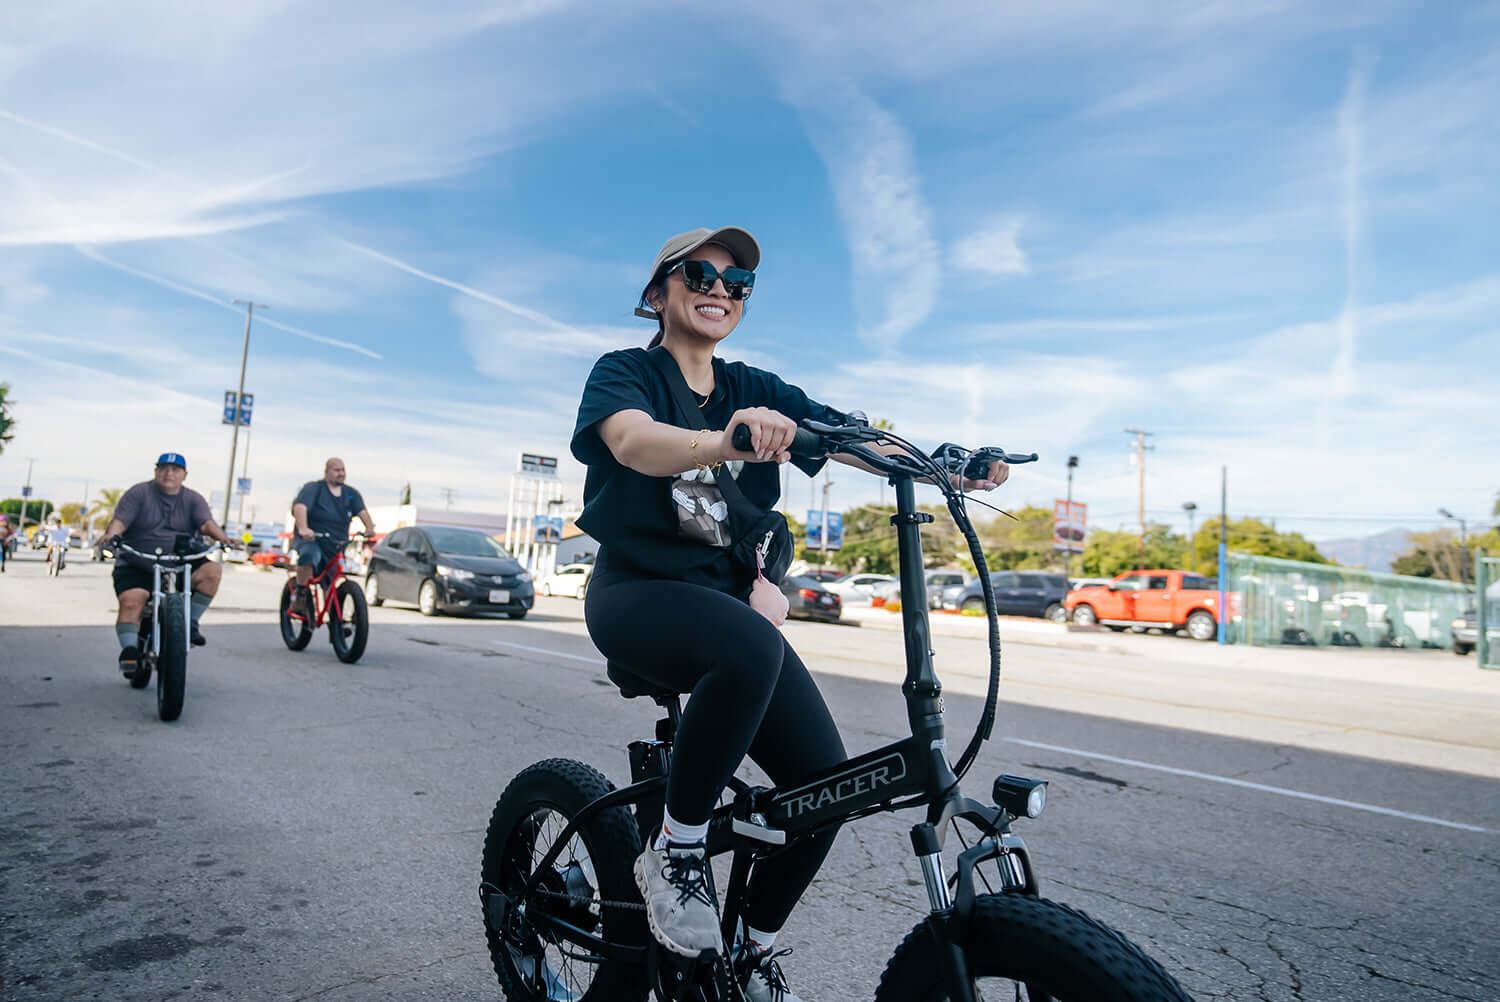 How Much Does An Electric Bike Cost?